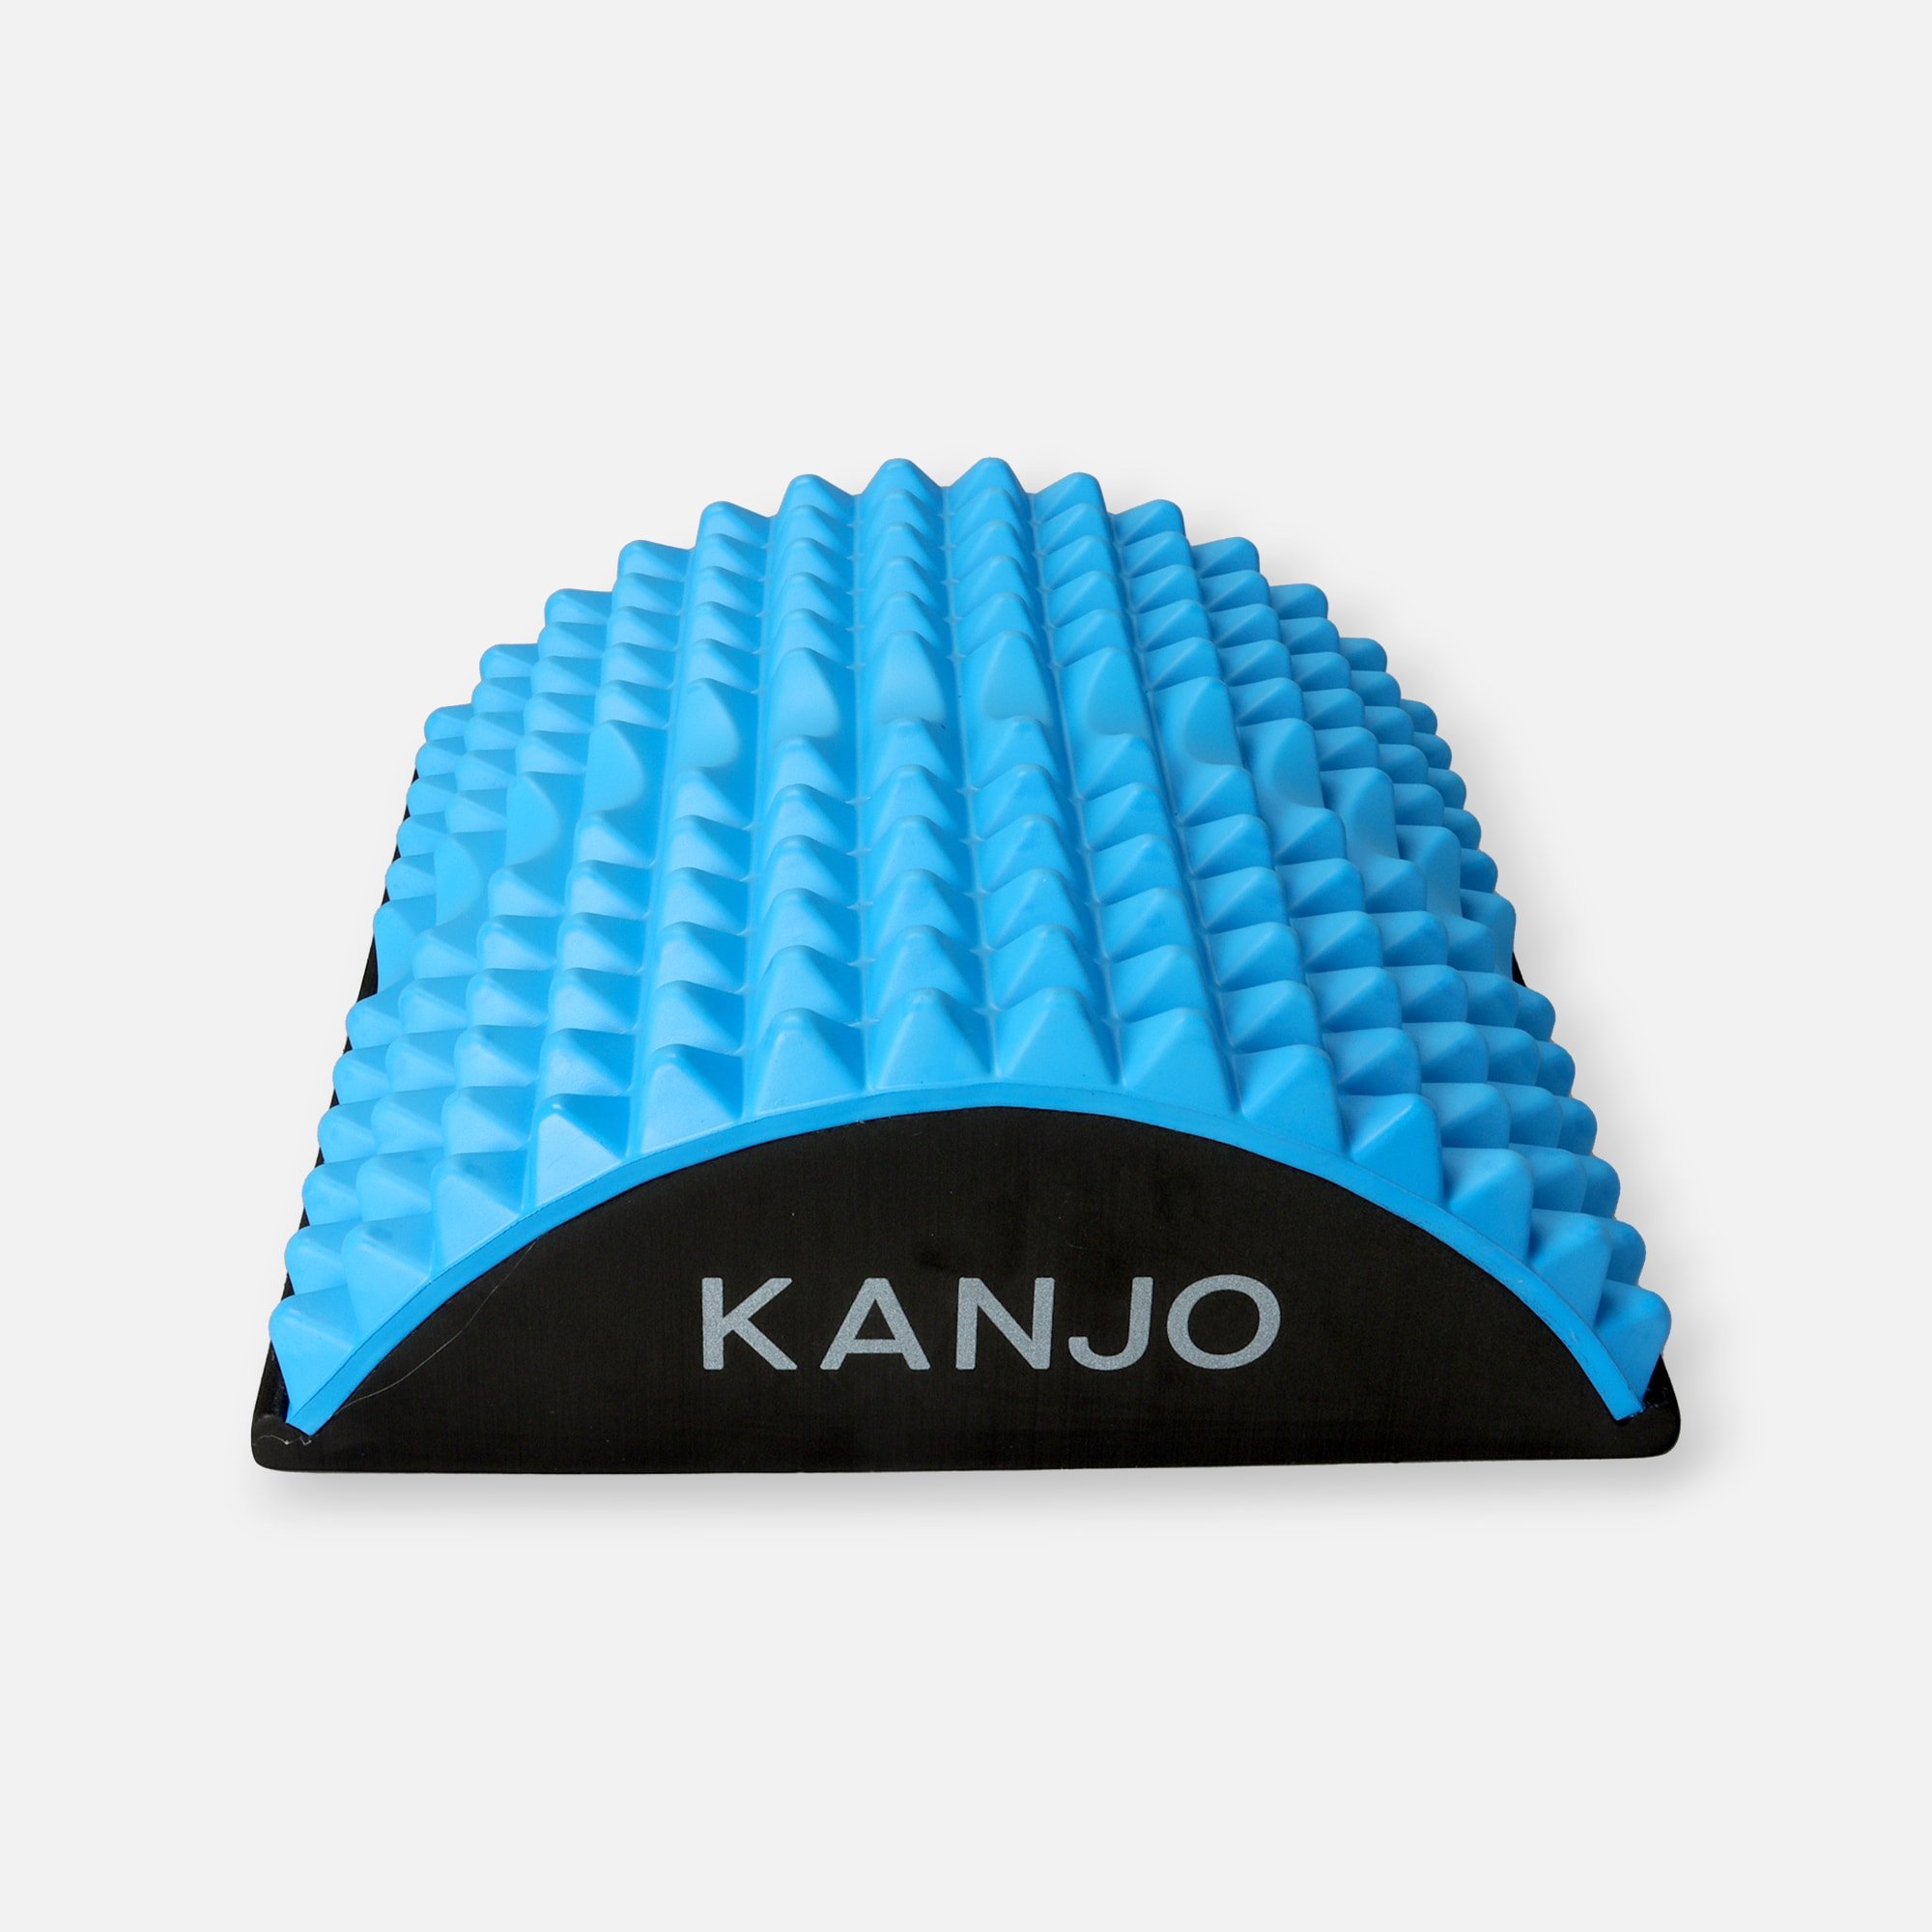 Kanjo FSA HSA Eligible Acupressure Lower Back Pain Relief Cushion